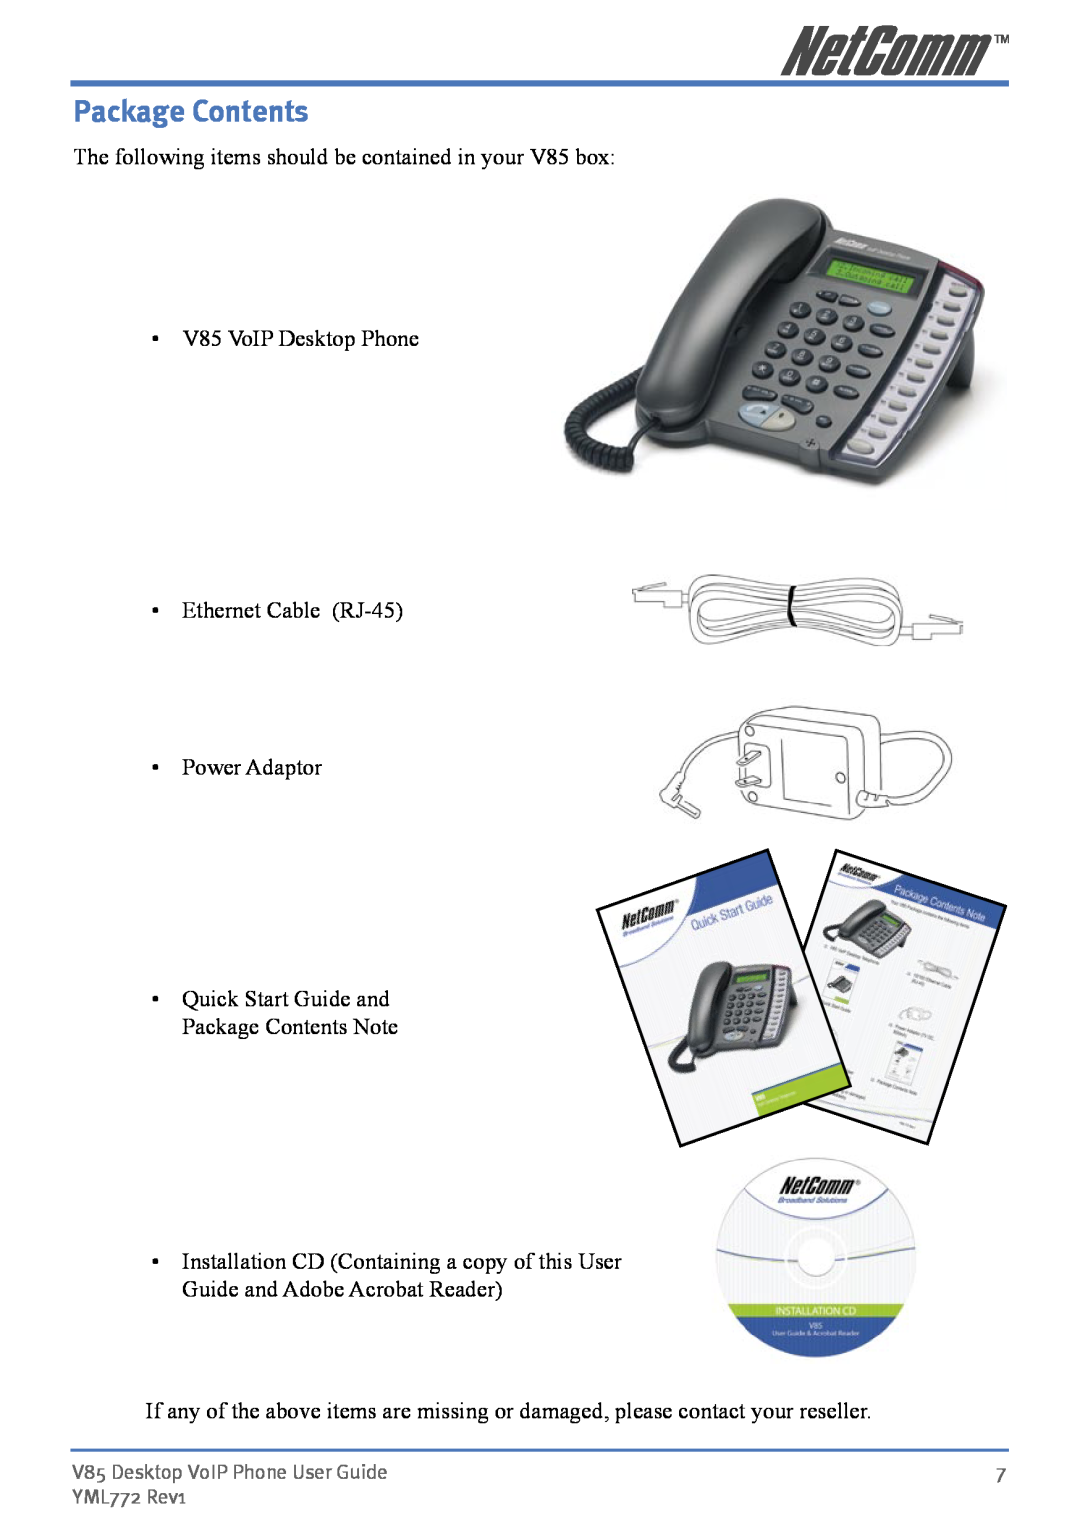 NetComm Package Contents, The following items should be contained in your V85 box, V85 Desktop VoIP Phone User Guide 